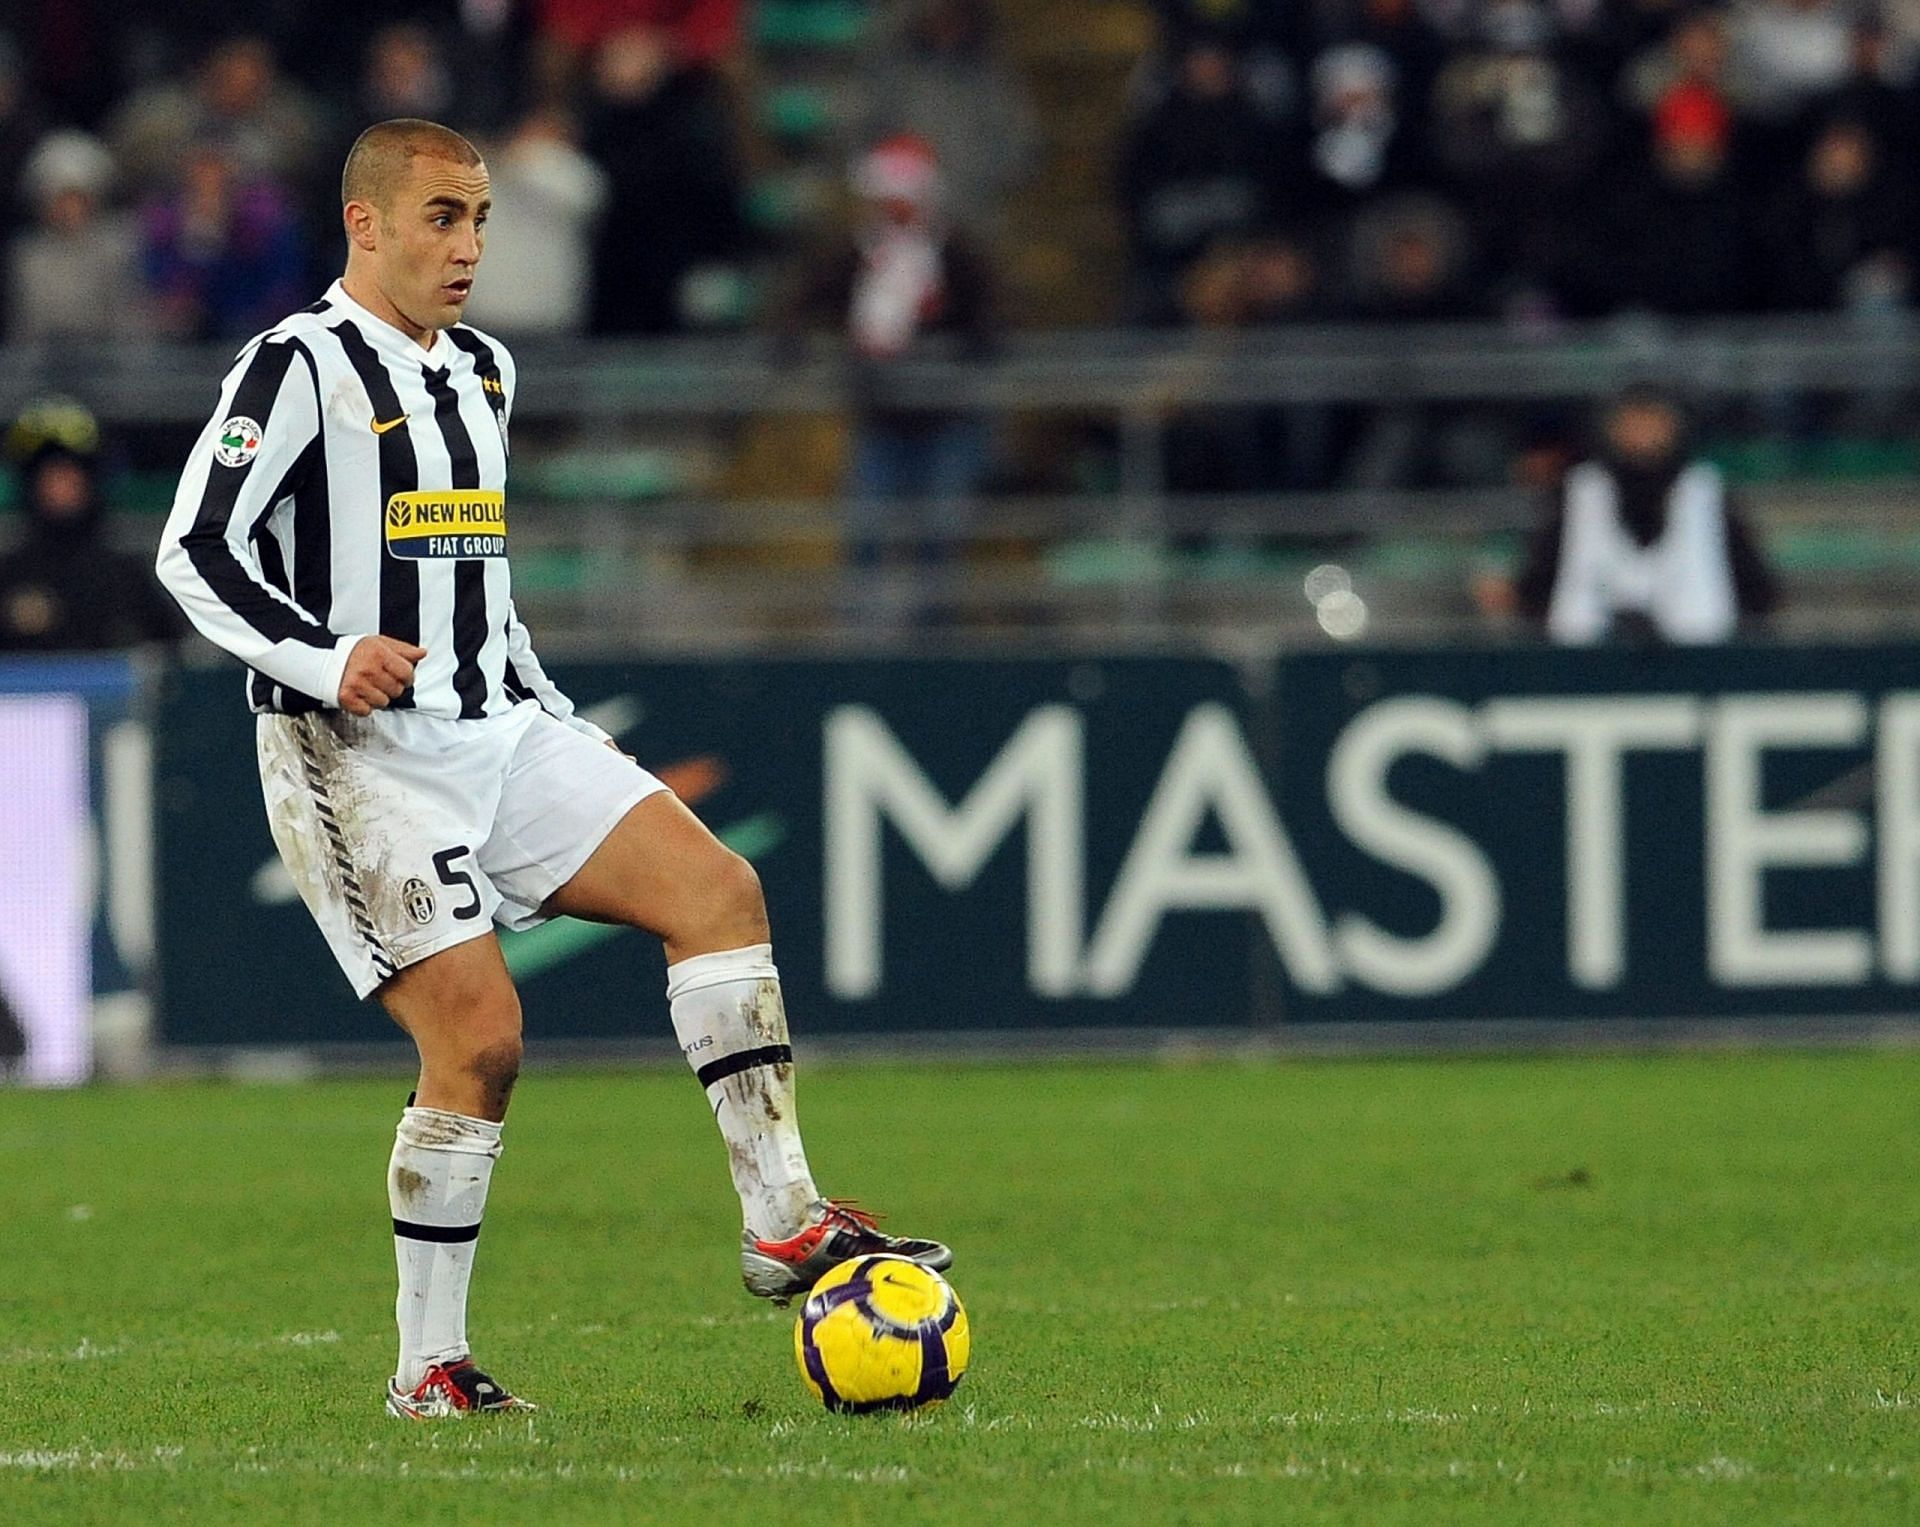 Fabio Cannavaro in action for the Old Lady in a Serie A game against Bari